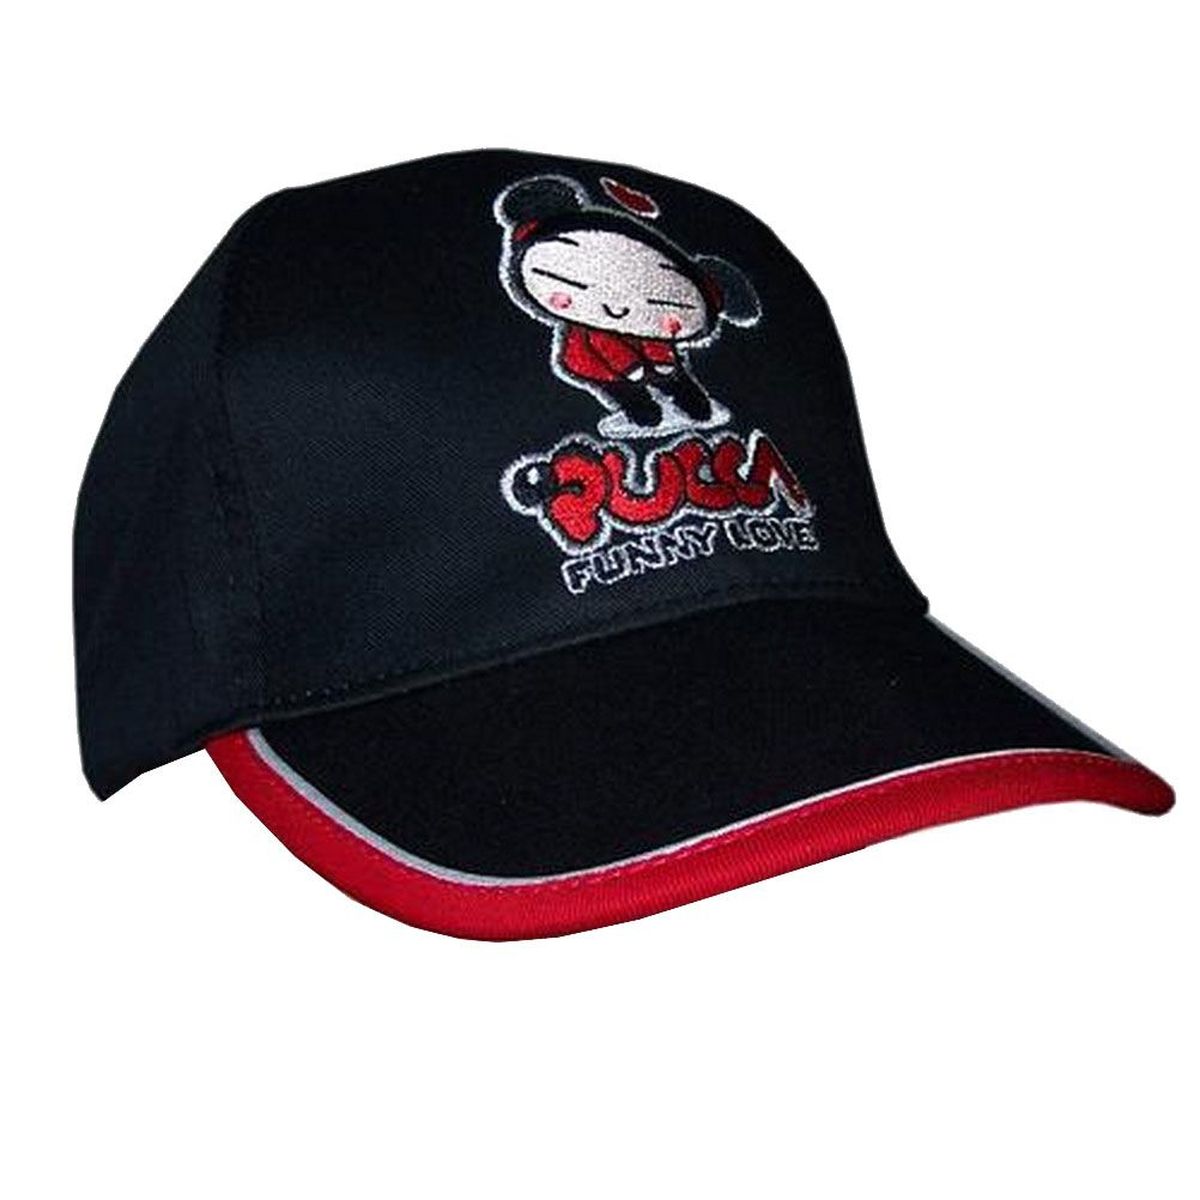 Casquette Pucca brode noire taille 52 cm